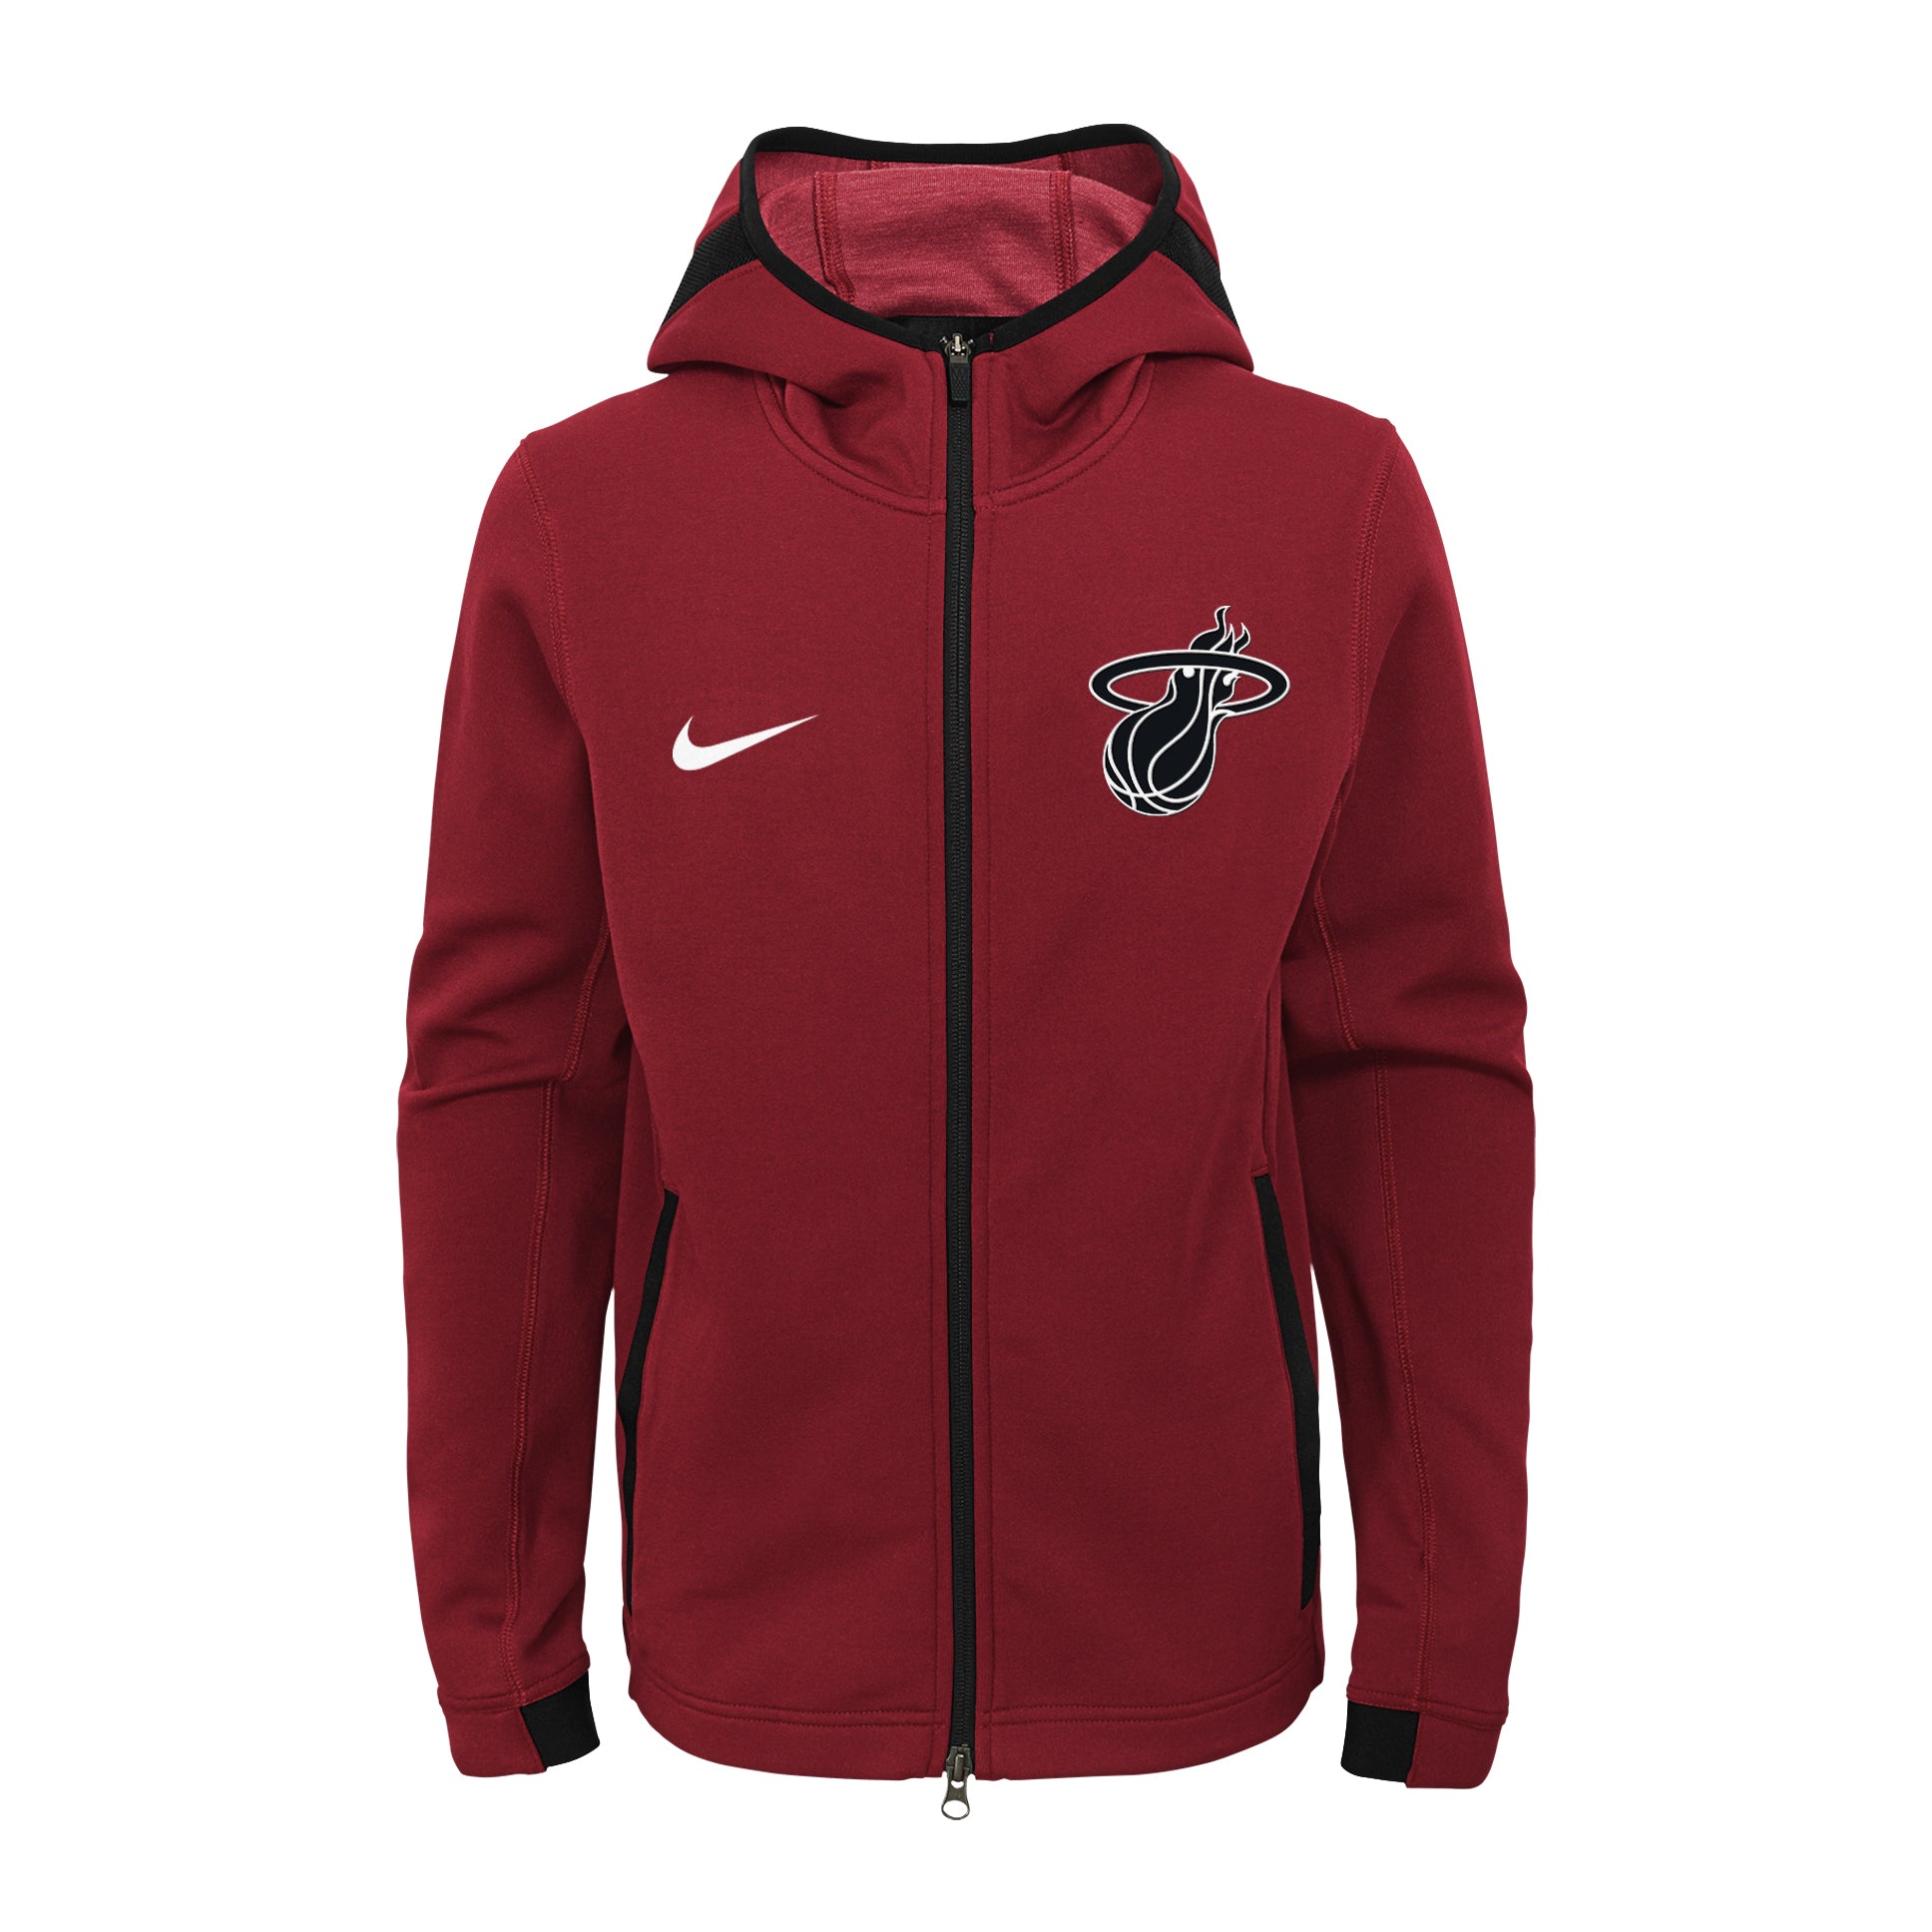 nike youth showtime hoodie